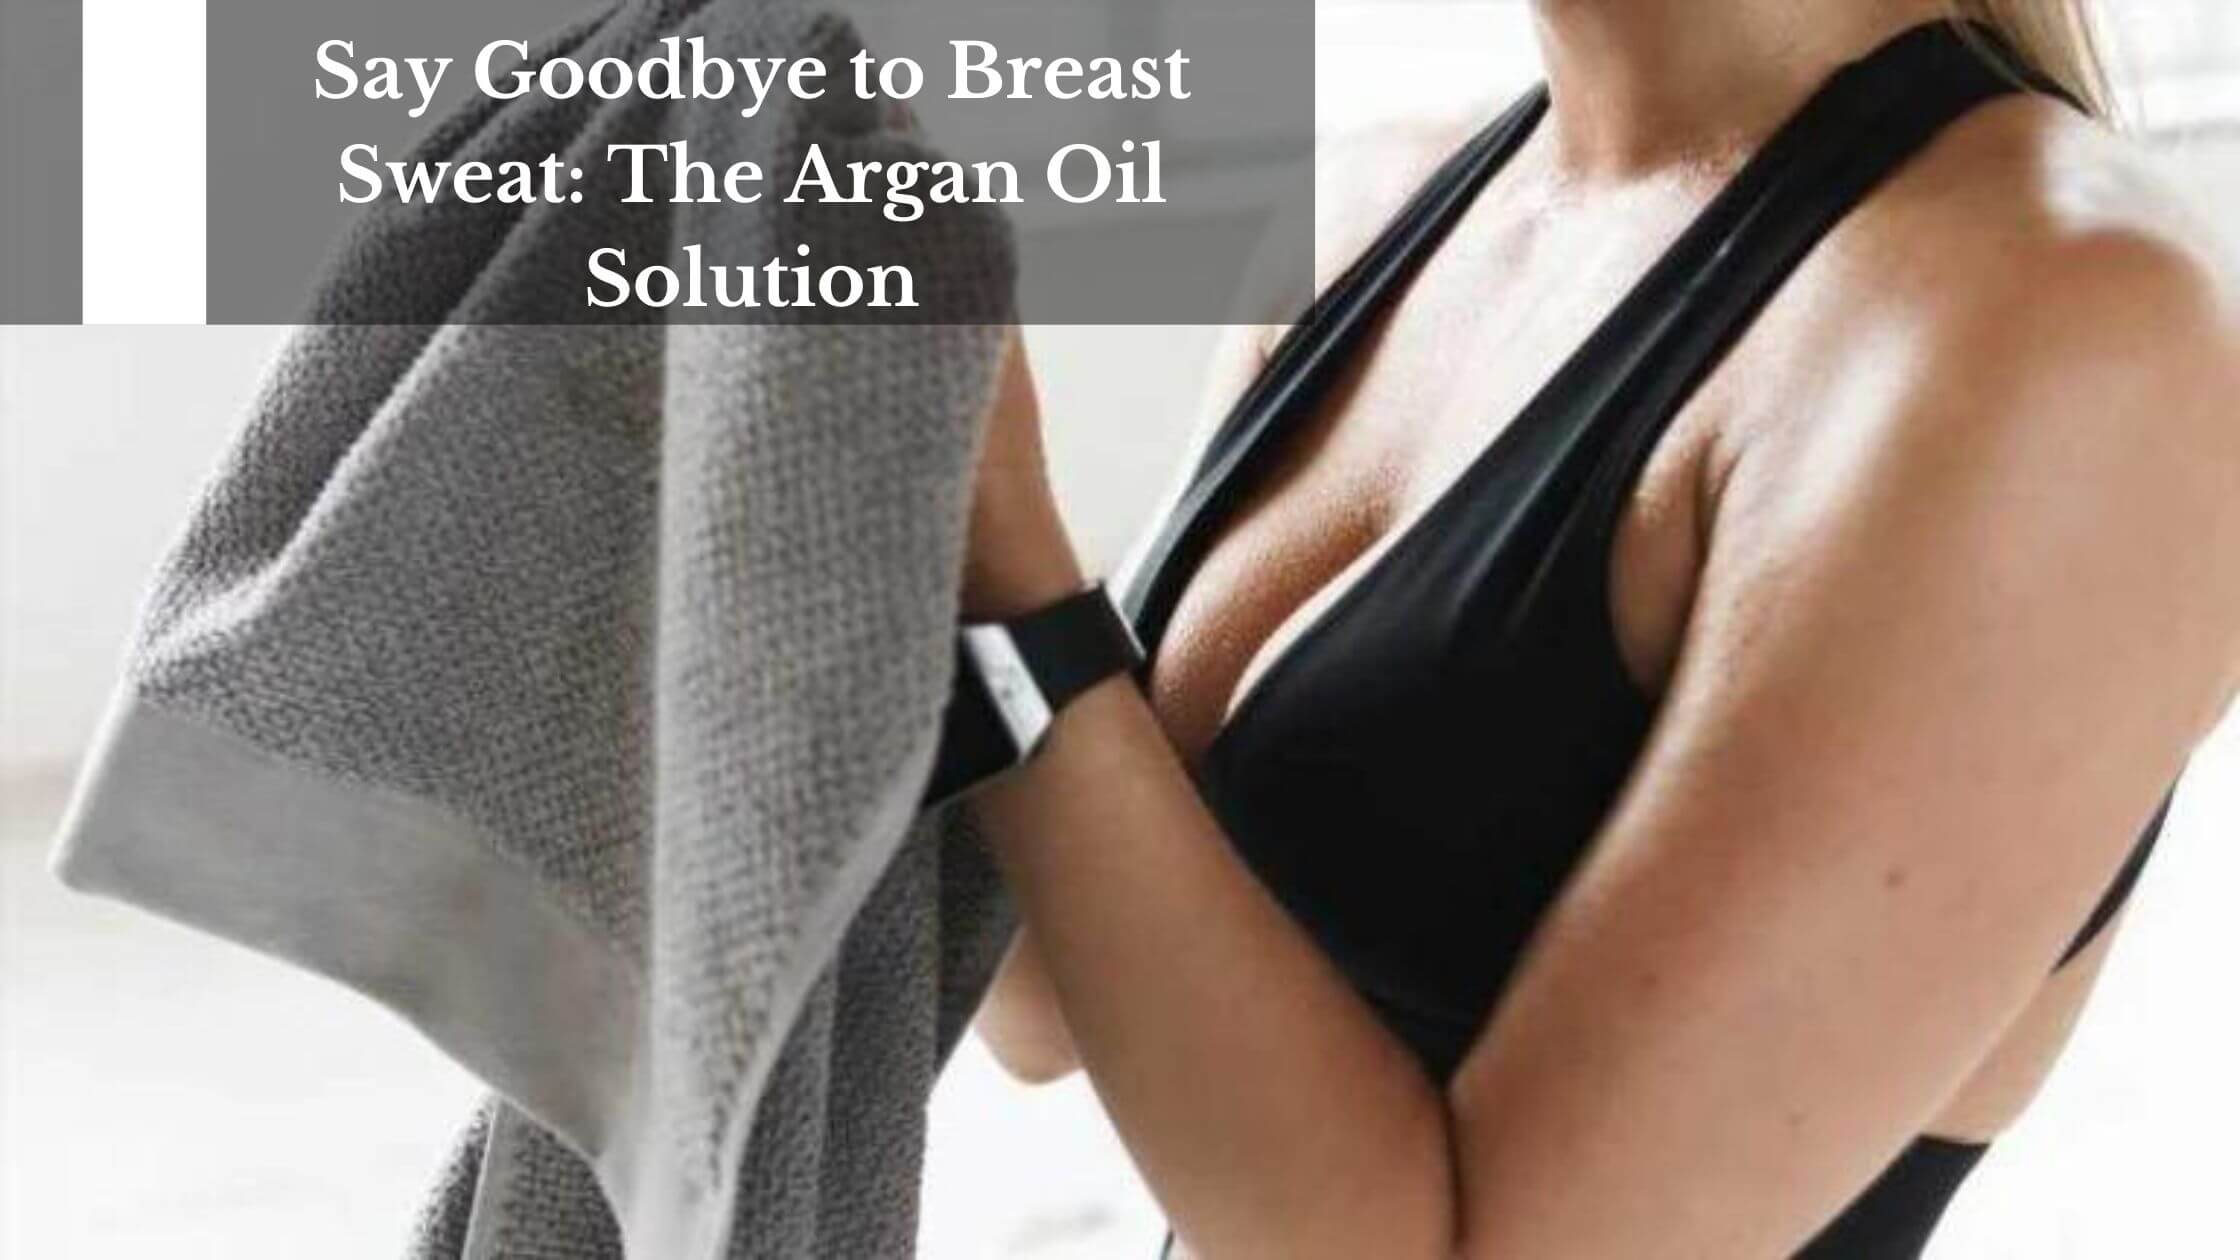 Say Goodbye to Breast Sweat: The Argan Oil Solution